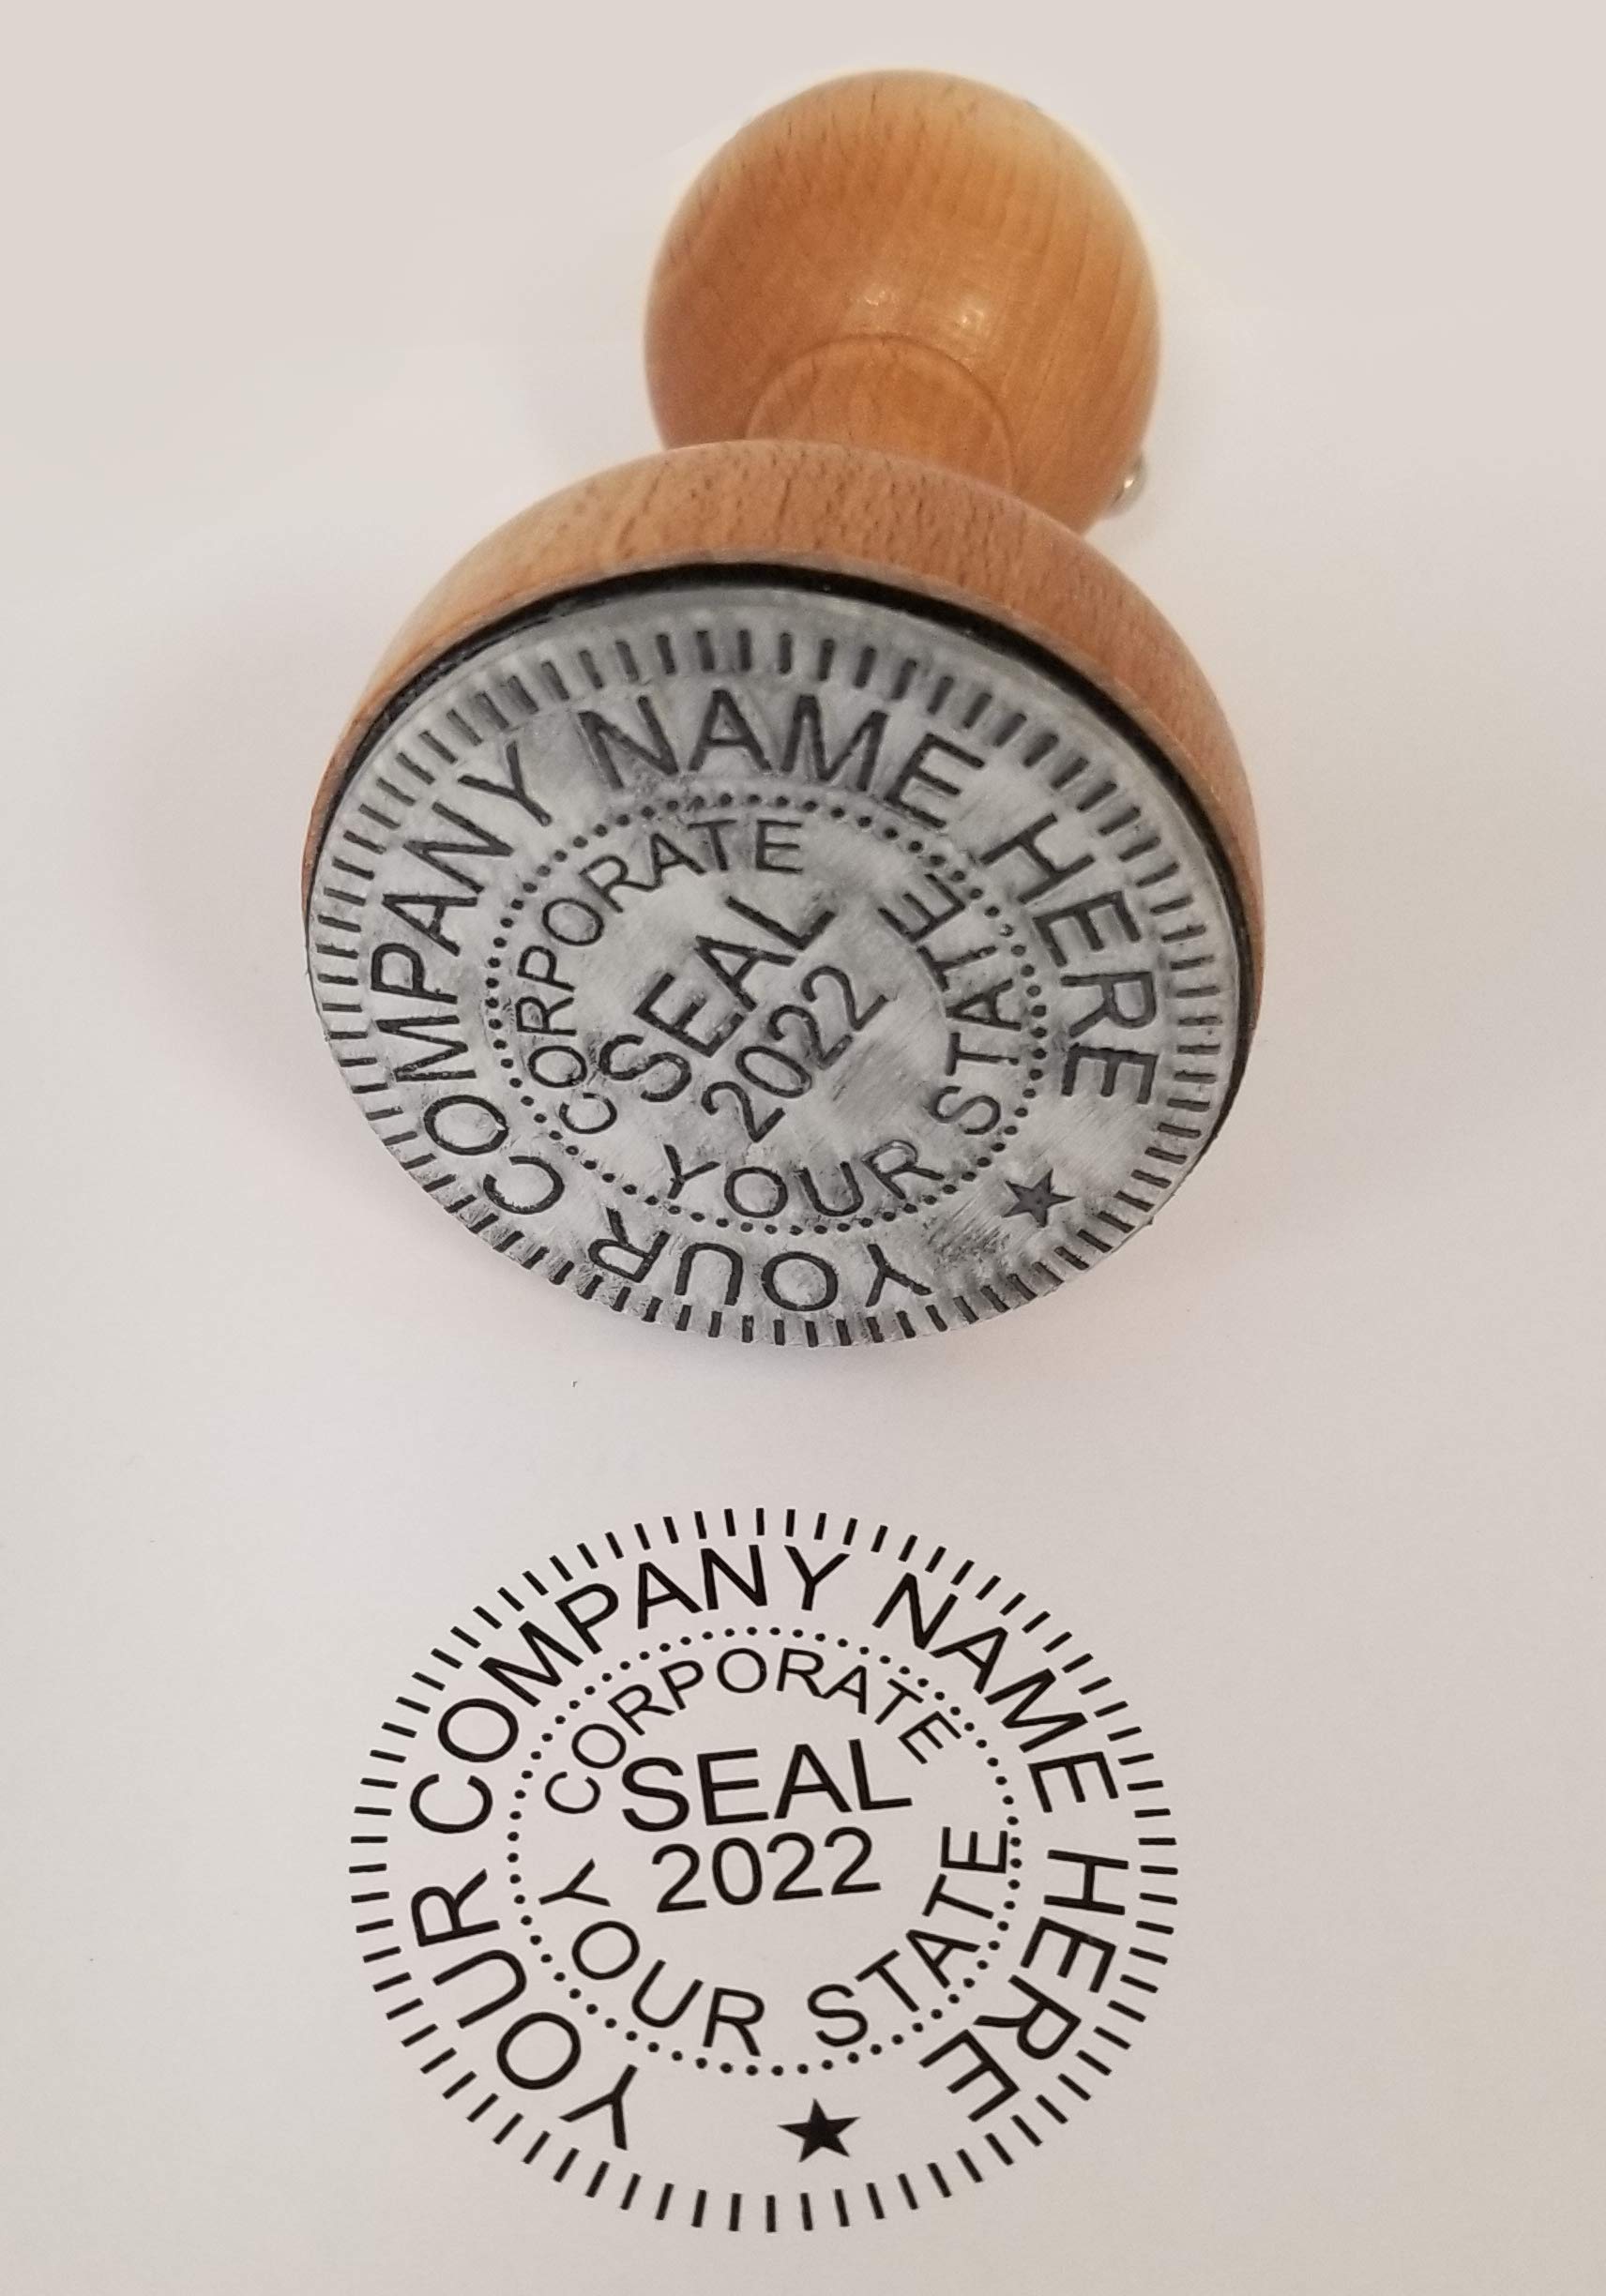 Corporate seal or stamp